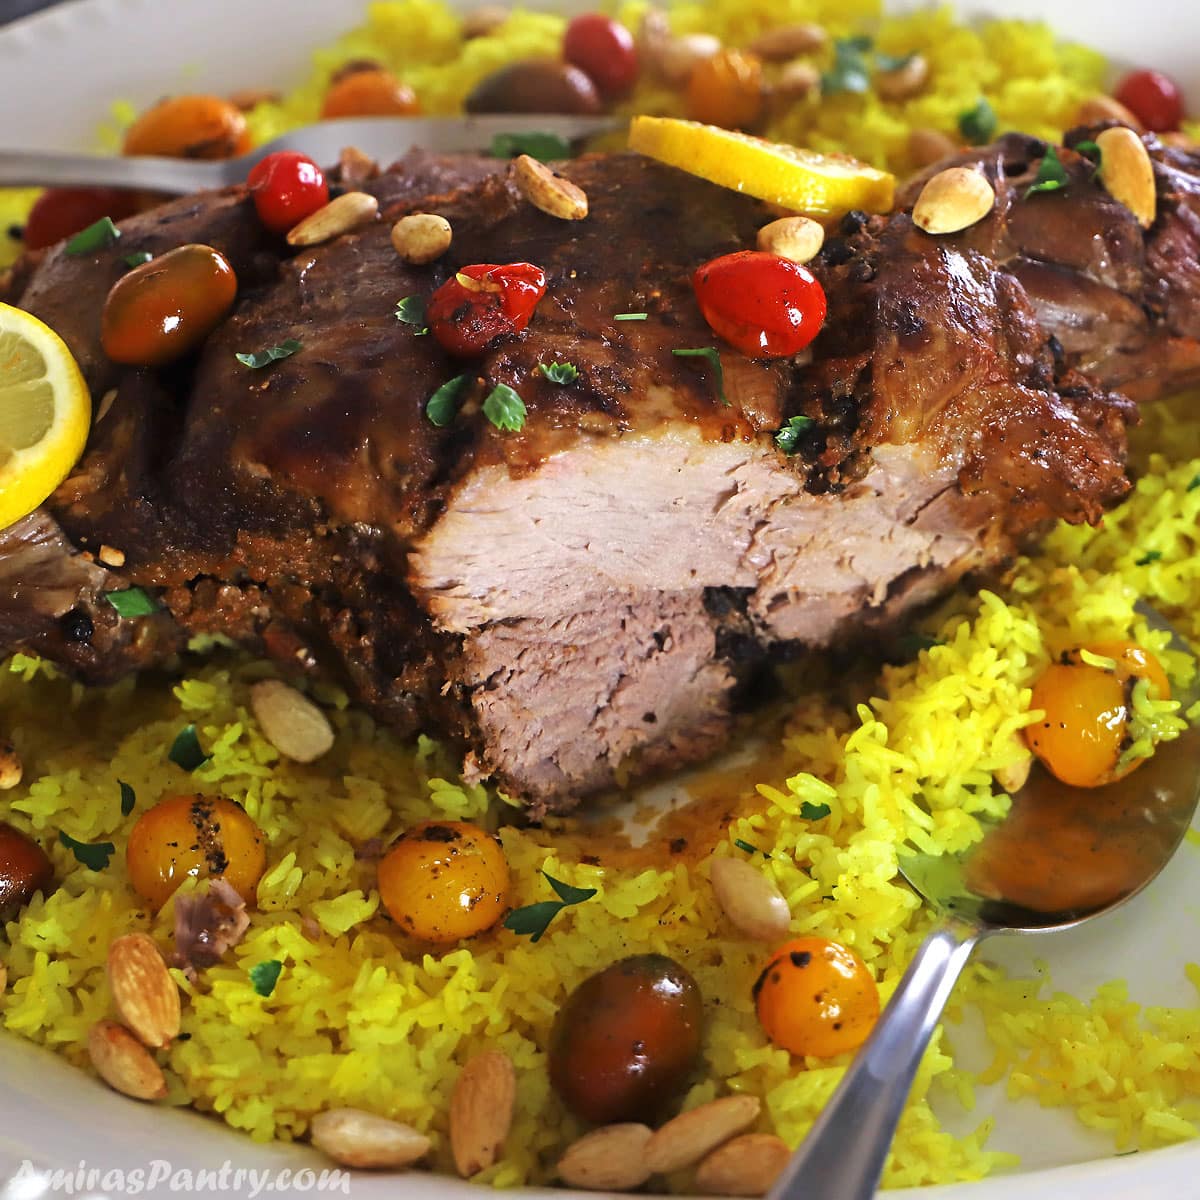 A close look at a leg of lamb with a piece carved out on a yellow rice platter.